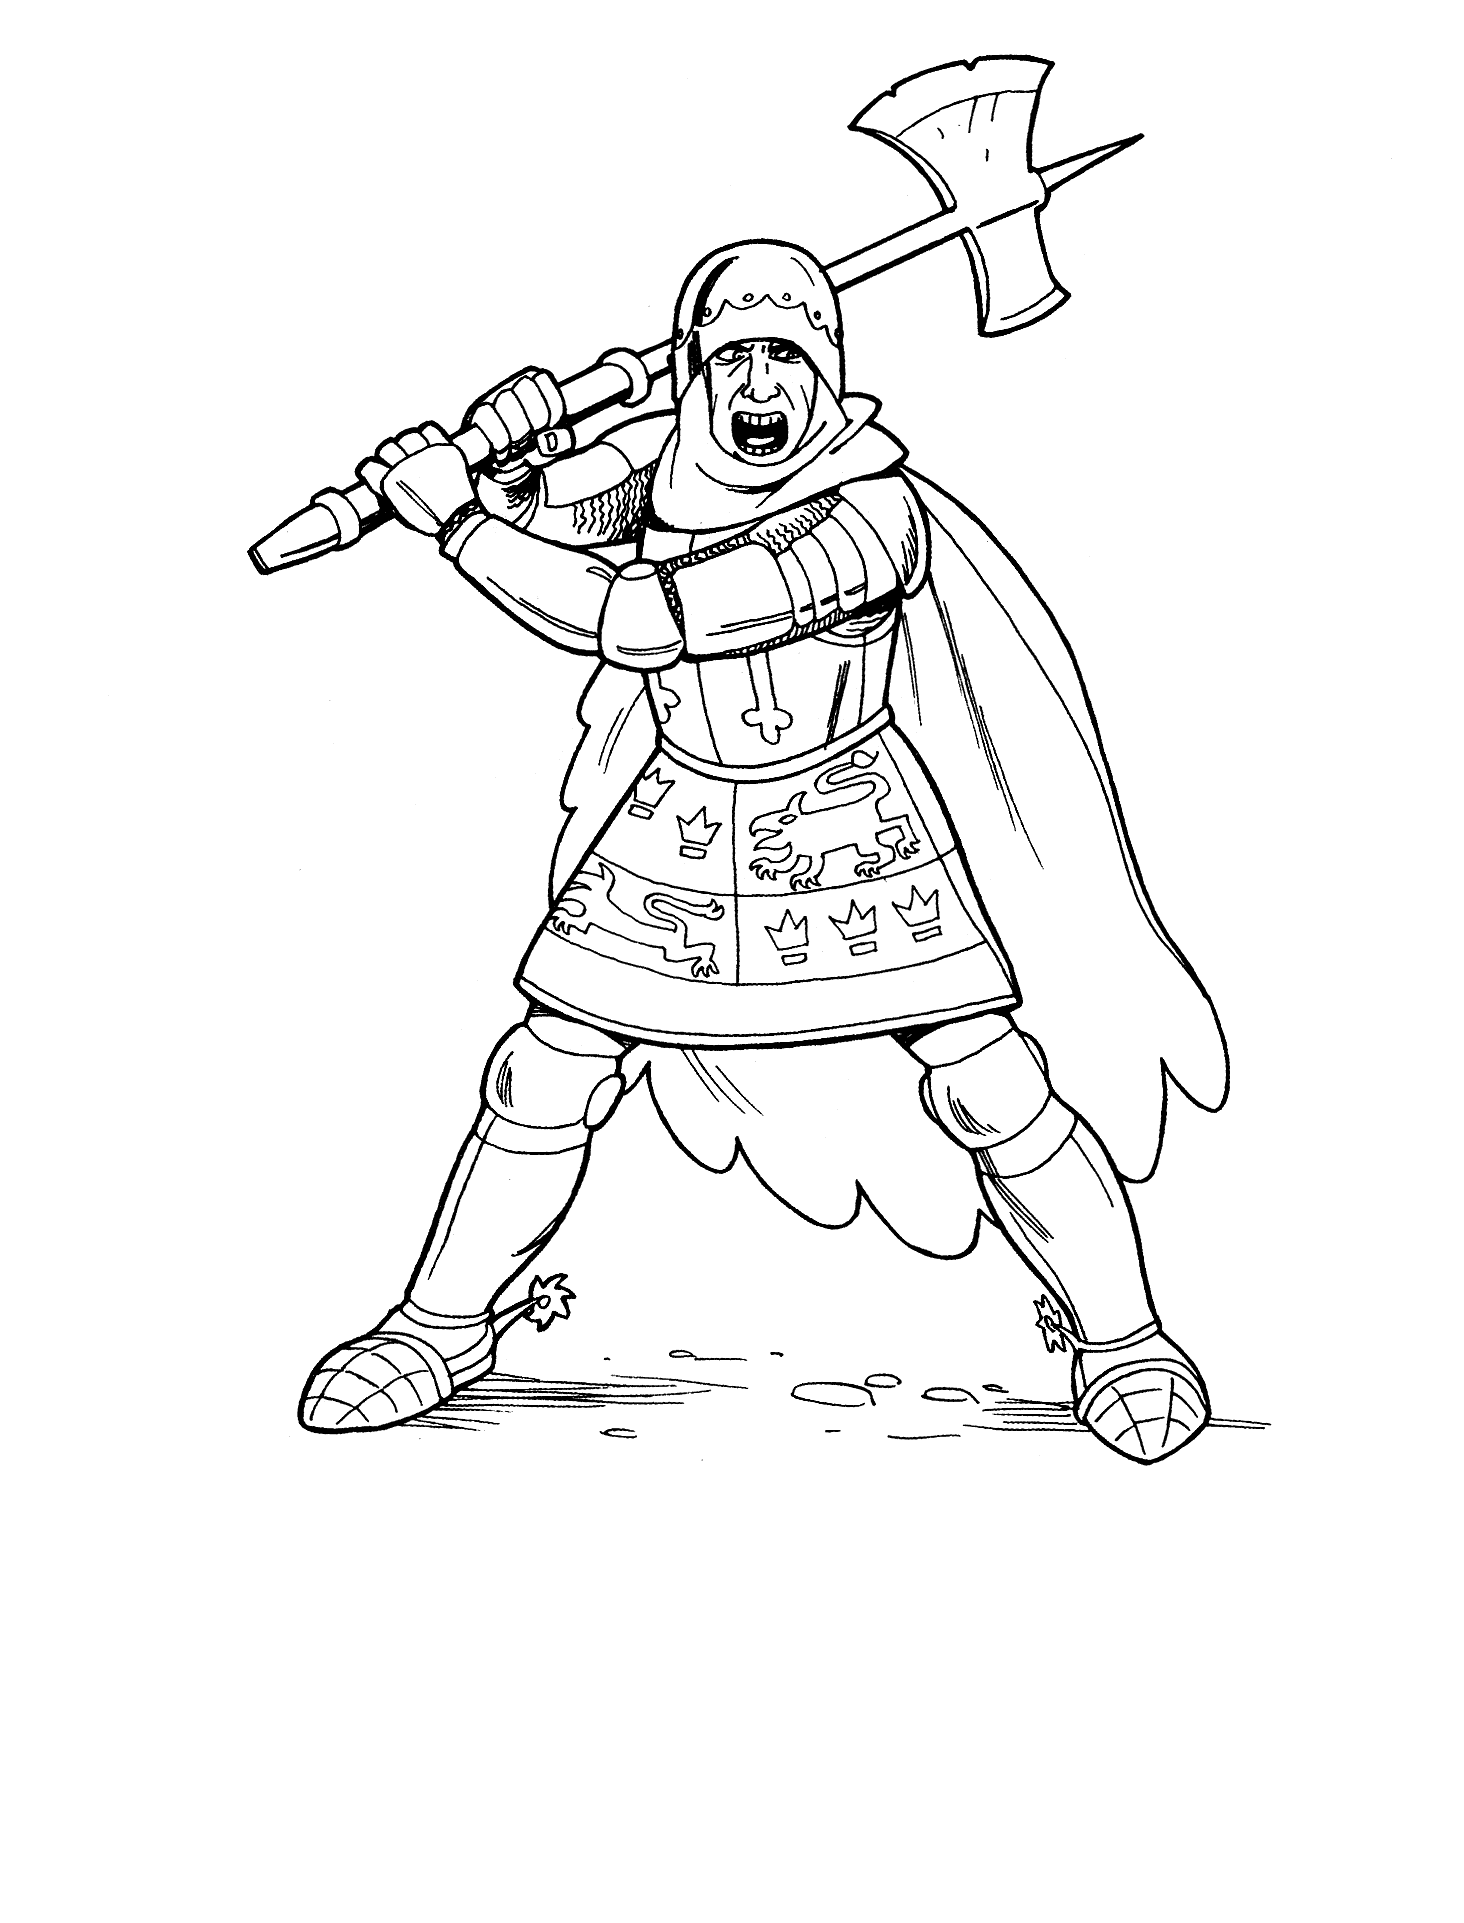 Soldiers and knights coloring pages 11 / Soldiers and Knights ...